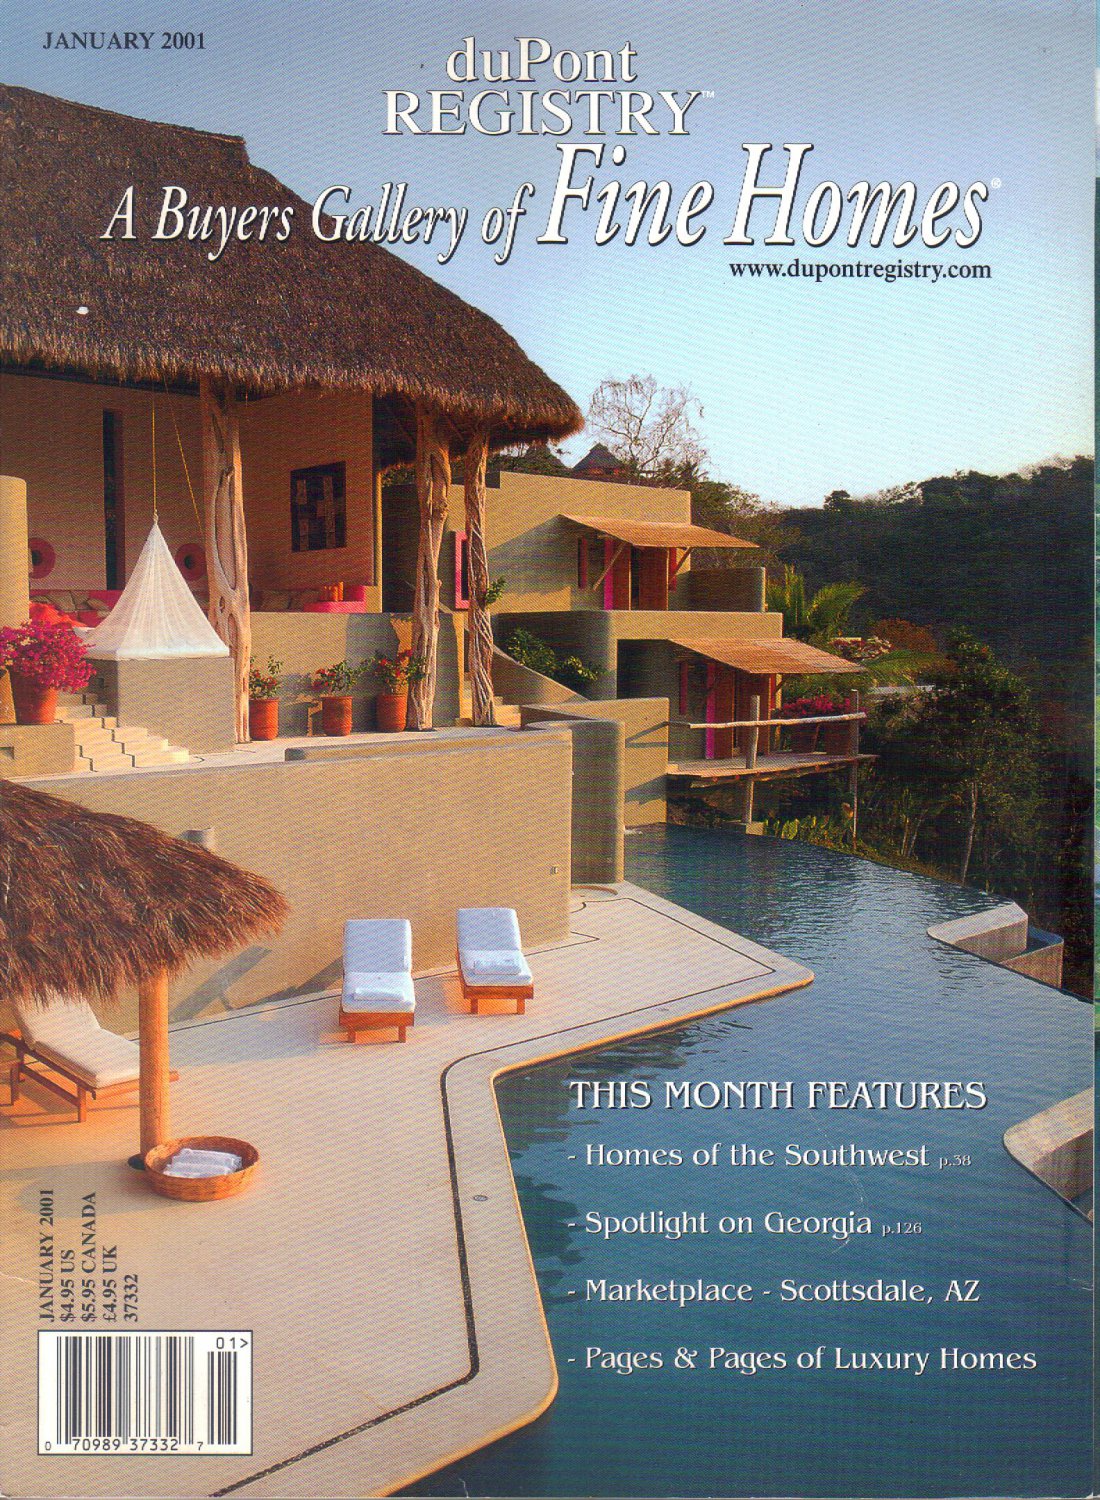 duPont Registry A Buyers Gallery of Fine Homes Magazine-January 2001-Casa Barranquilla-Carreyes